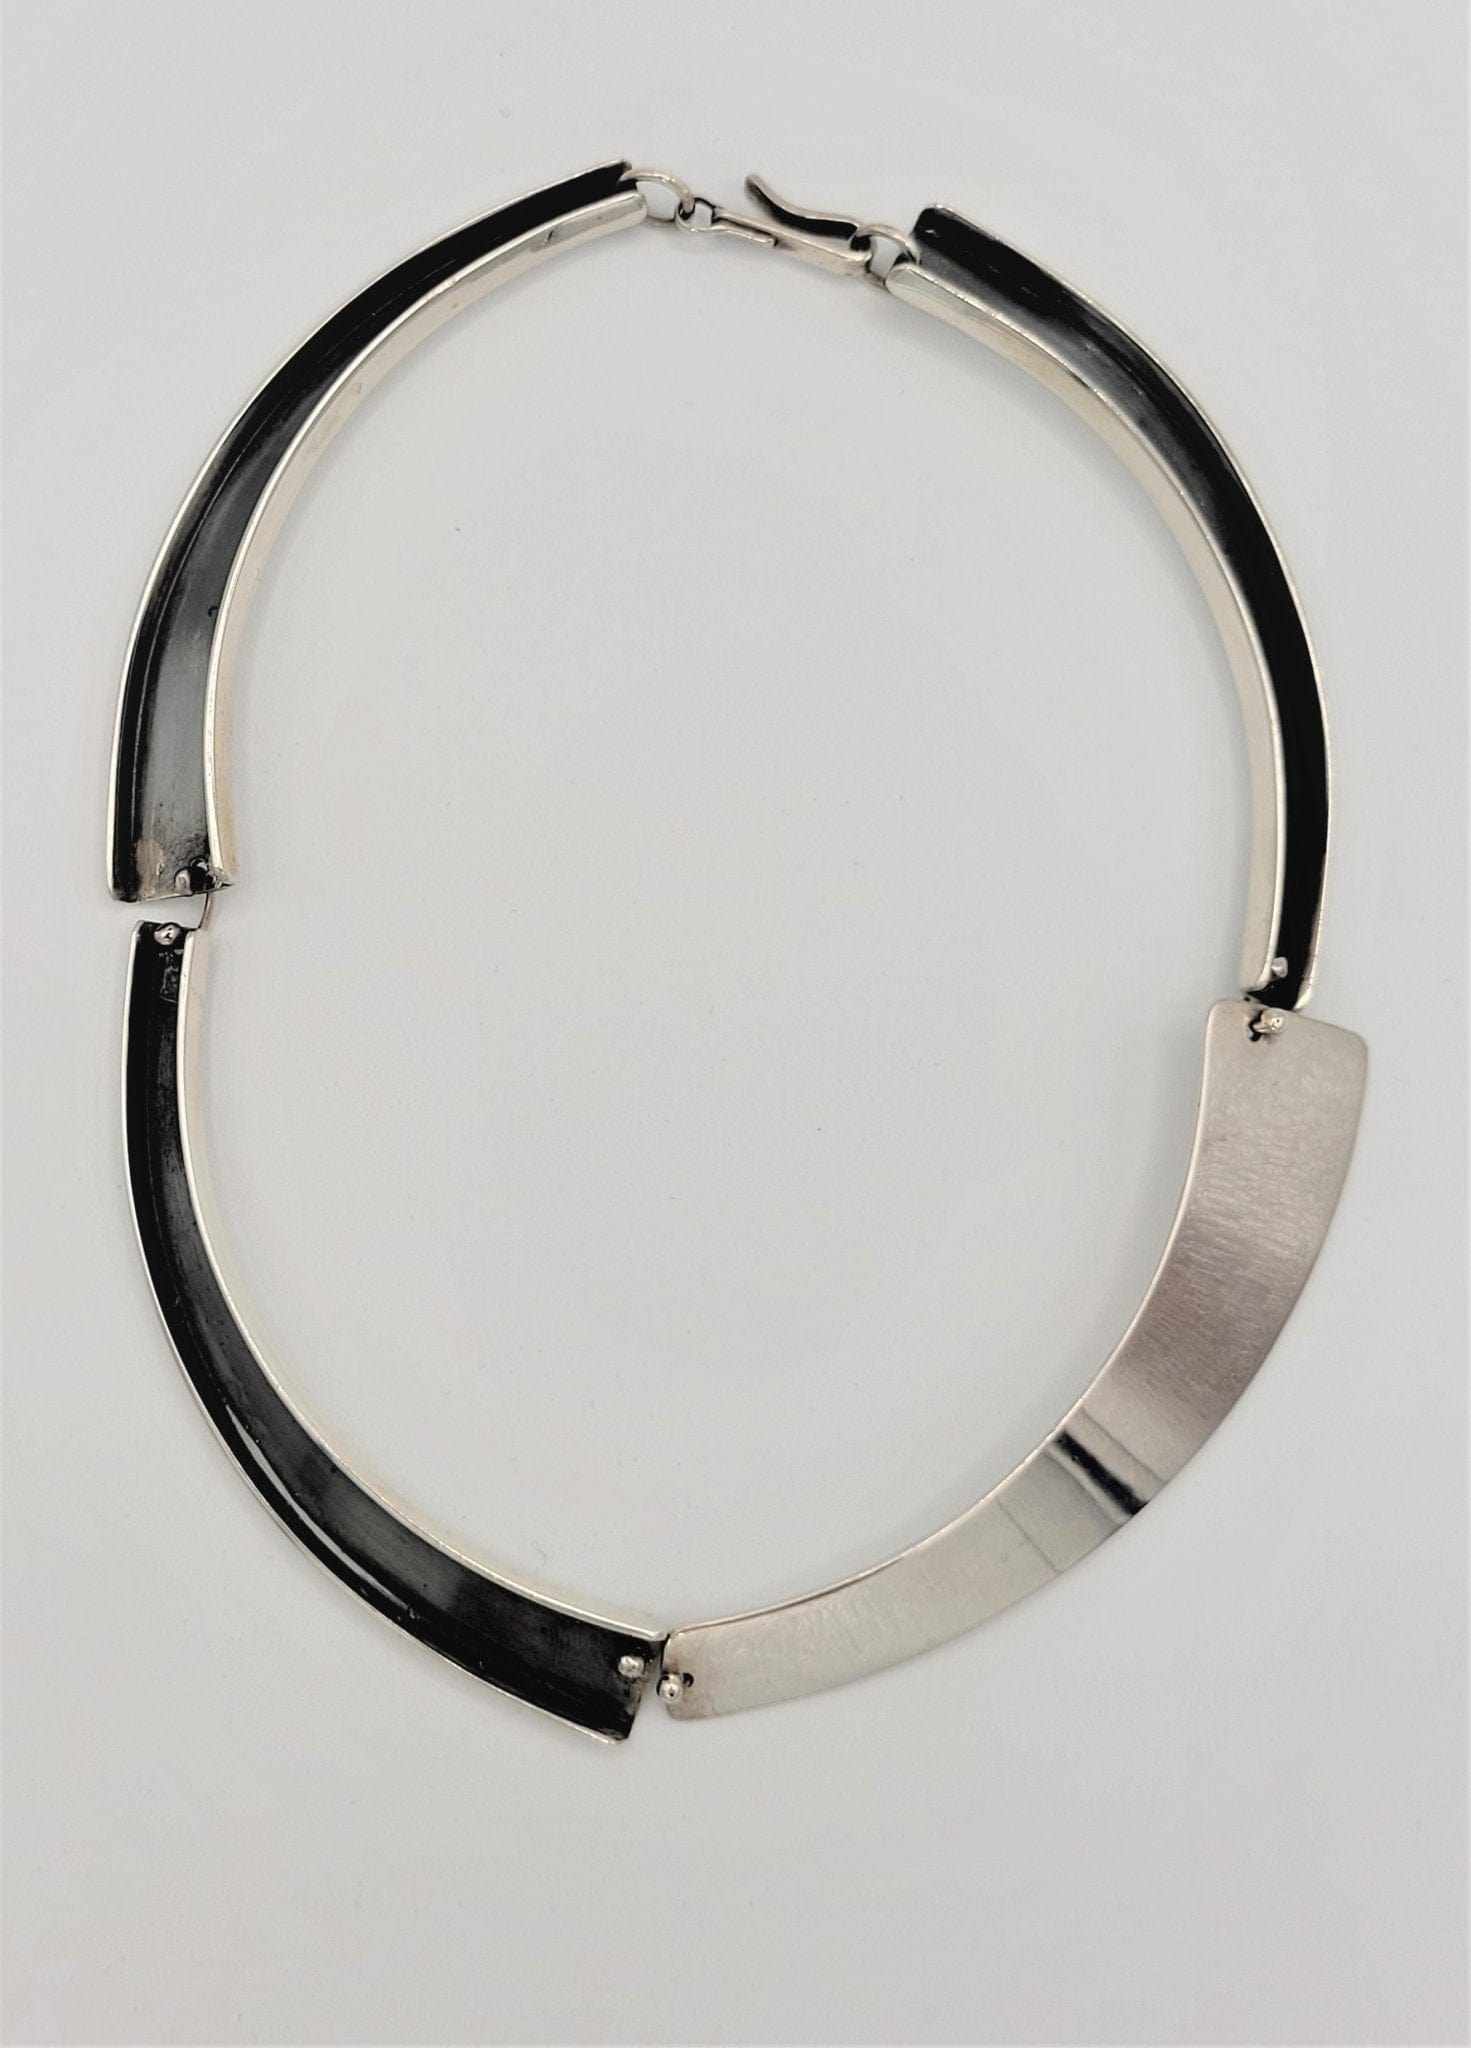 Ed Wiener Jewelry Iconic Ed Wiener Sterling Modernist Abstract Reversible Segment Collar Necklace